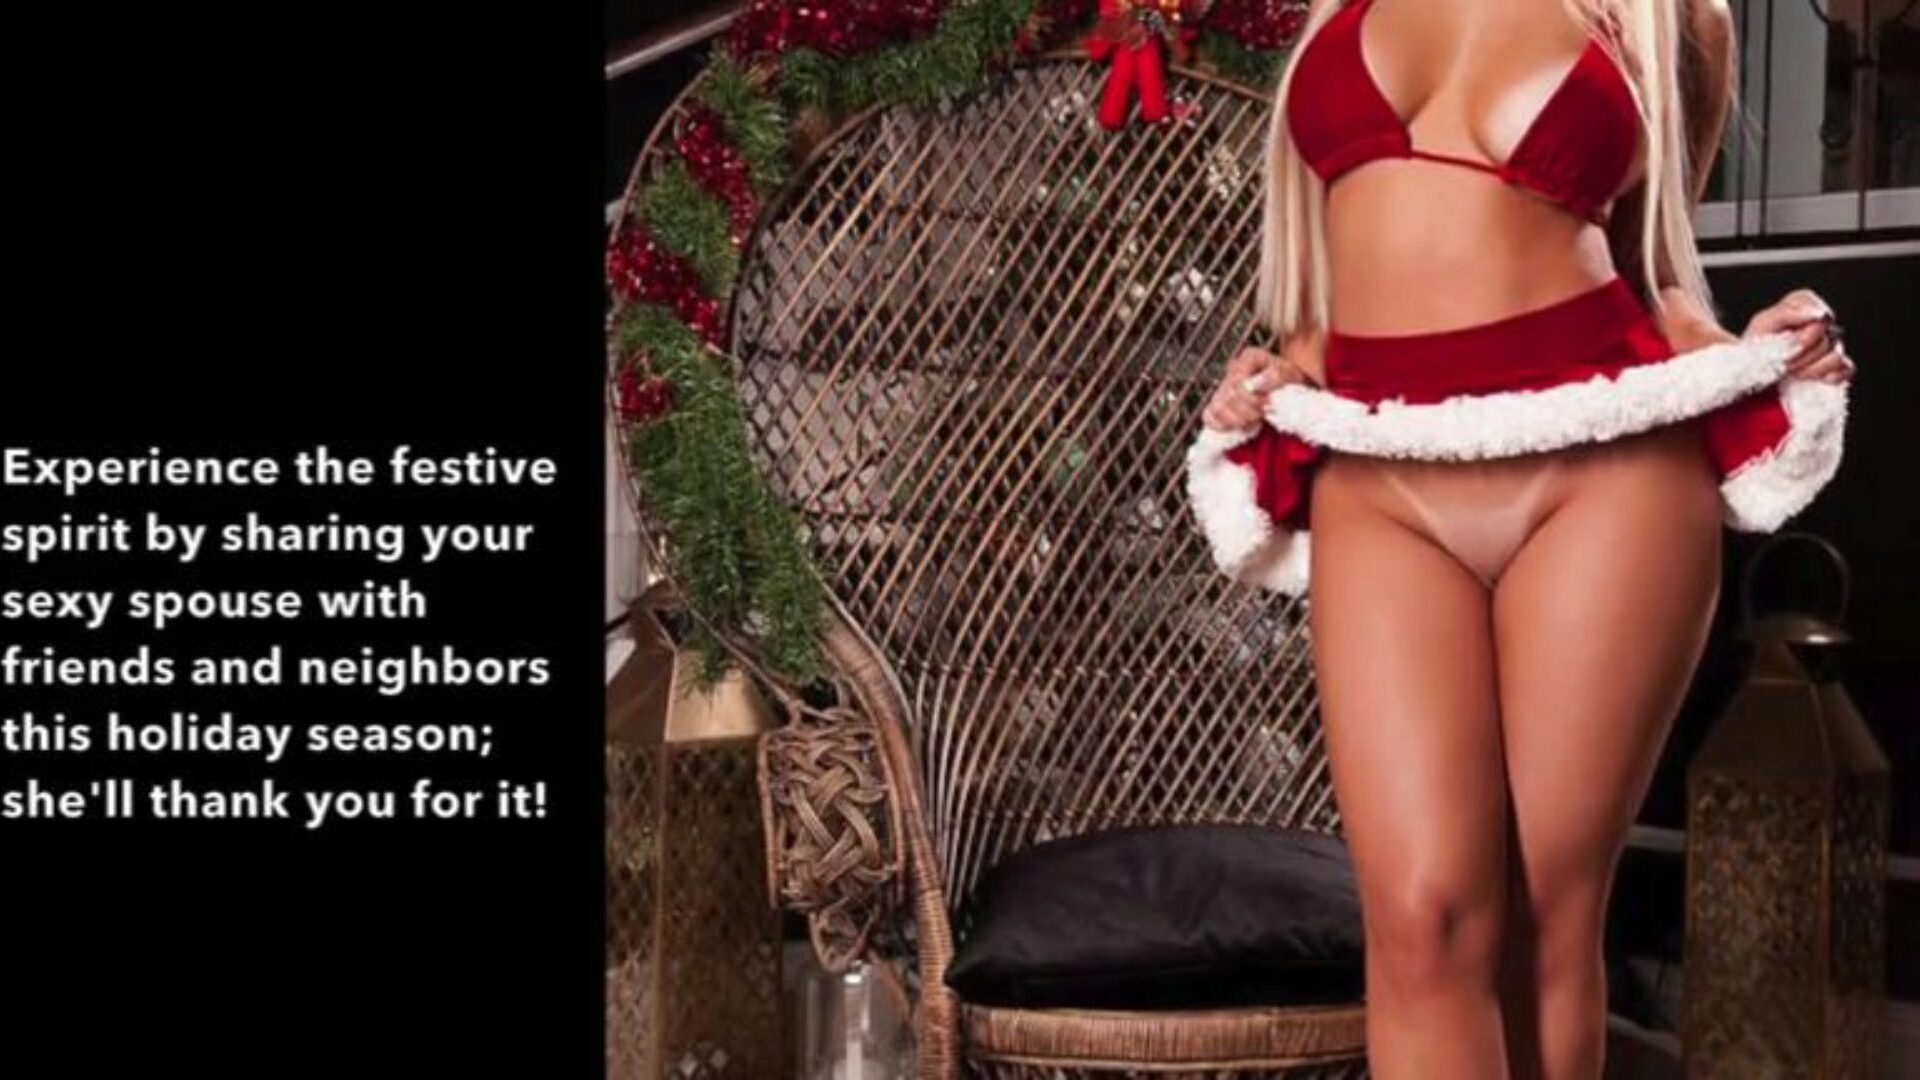 Perky Christmas 2019 wife sharing for the Xmas holidays) This holiday season give the almost all good bounty of all... your wifey  (Hotwife, cheating story, captions, bbc witnessing your wife have ejaculations and orgy with other dudes hallelujah!)